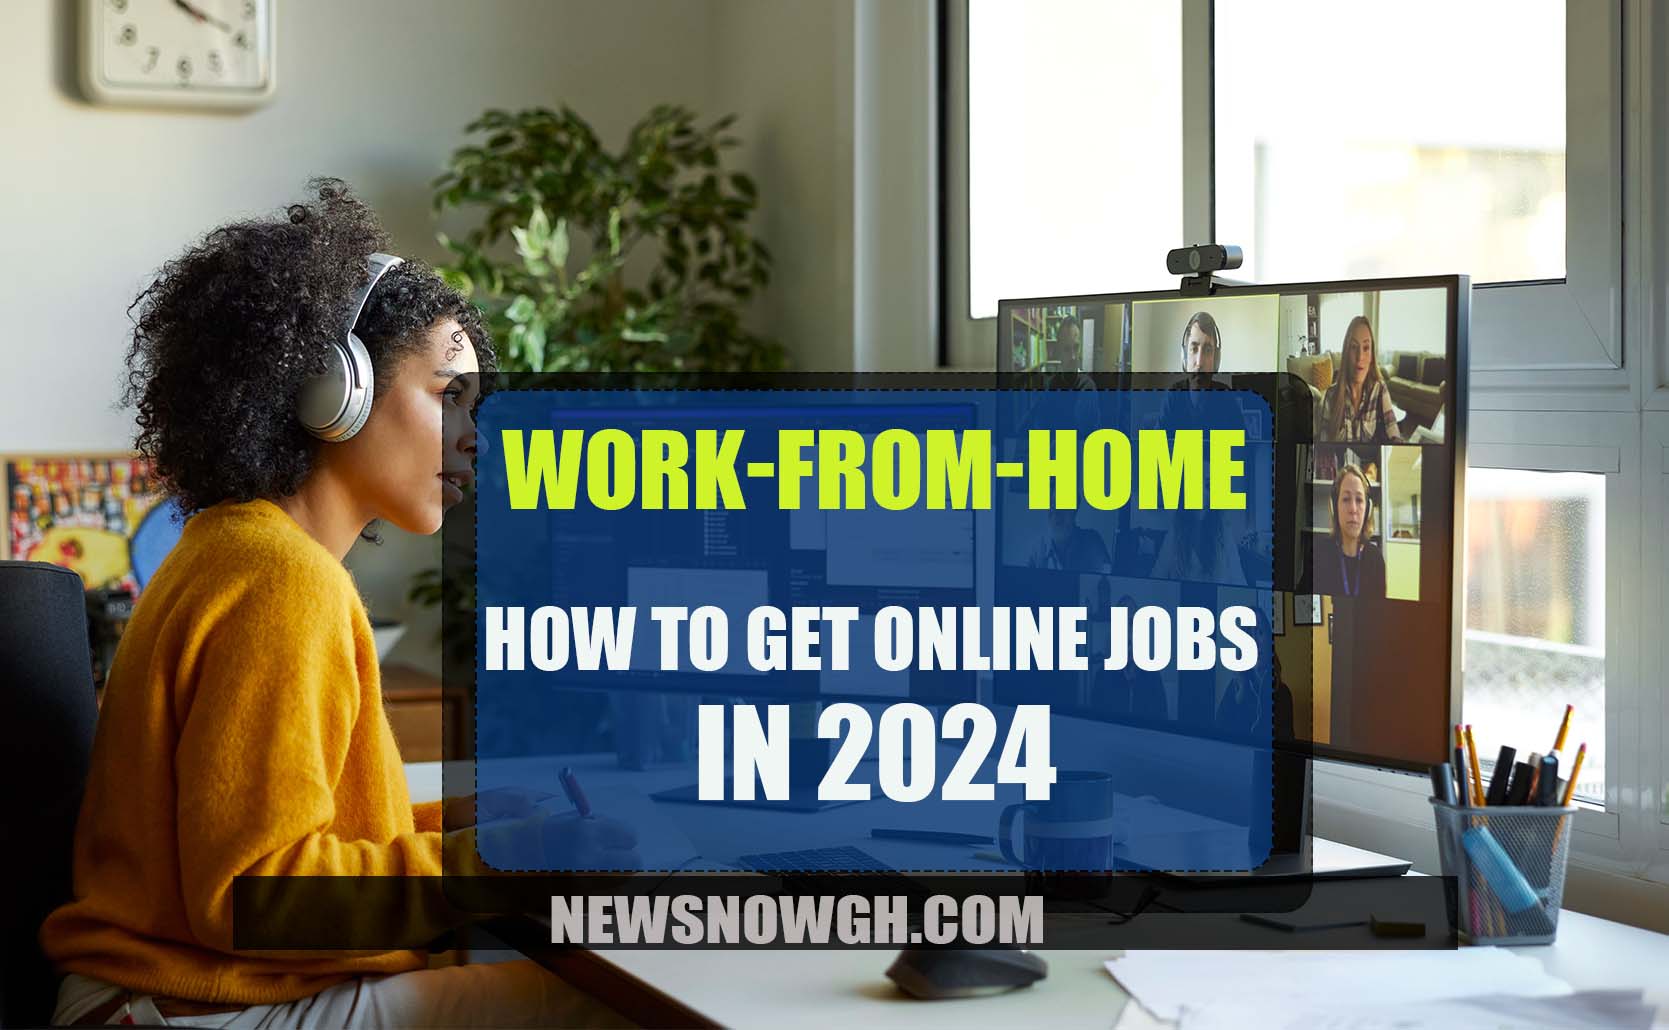 How To Get Online Jobs in 2024 | Work-From-Home